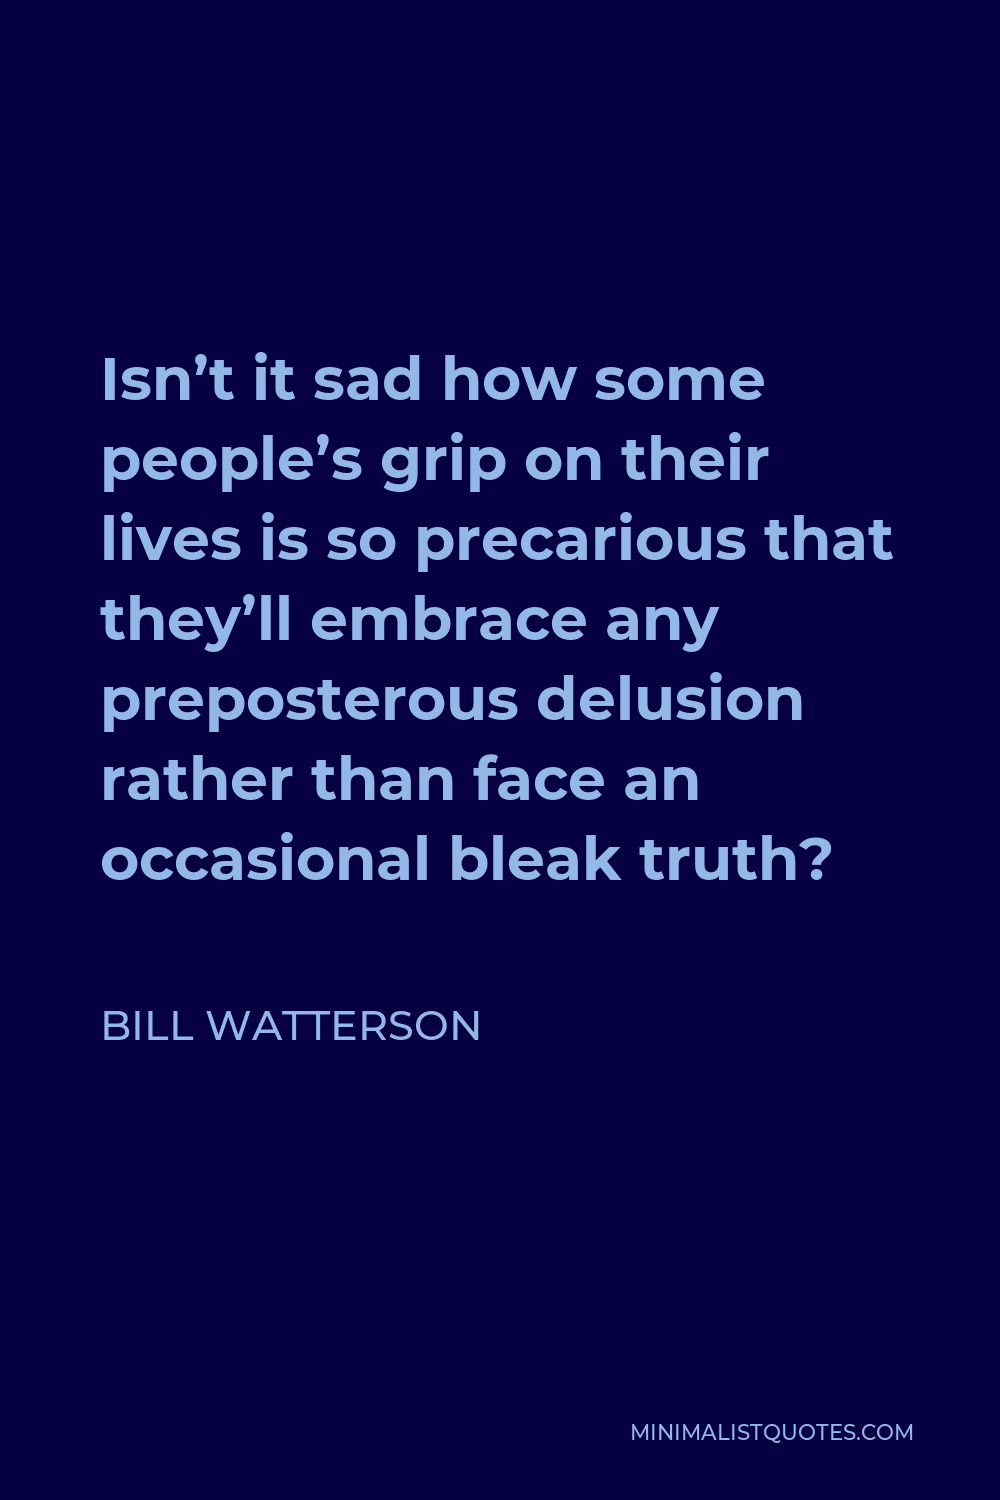 Bill Watterson Quote - Isn’t it sad how some people’s grip on their lives is so precarious that they’ll embrace any preposterous delusion rather than face an occasional bleak truth?